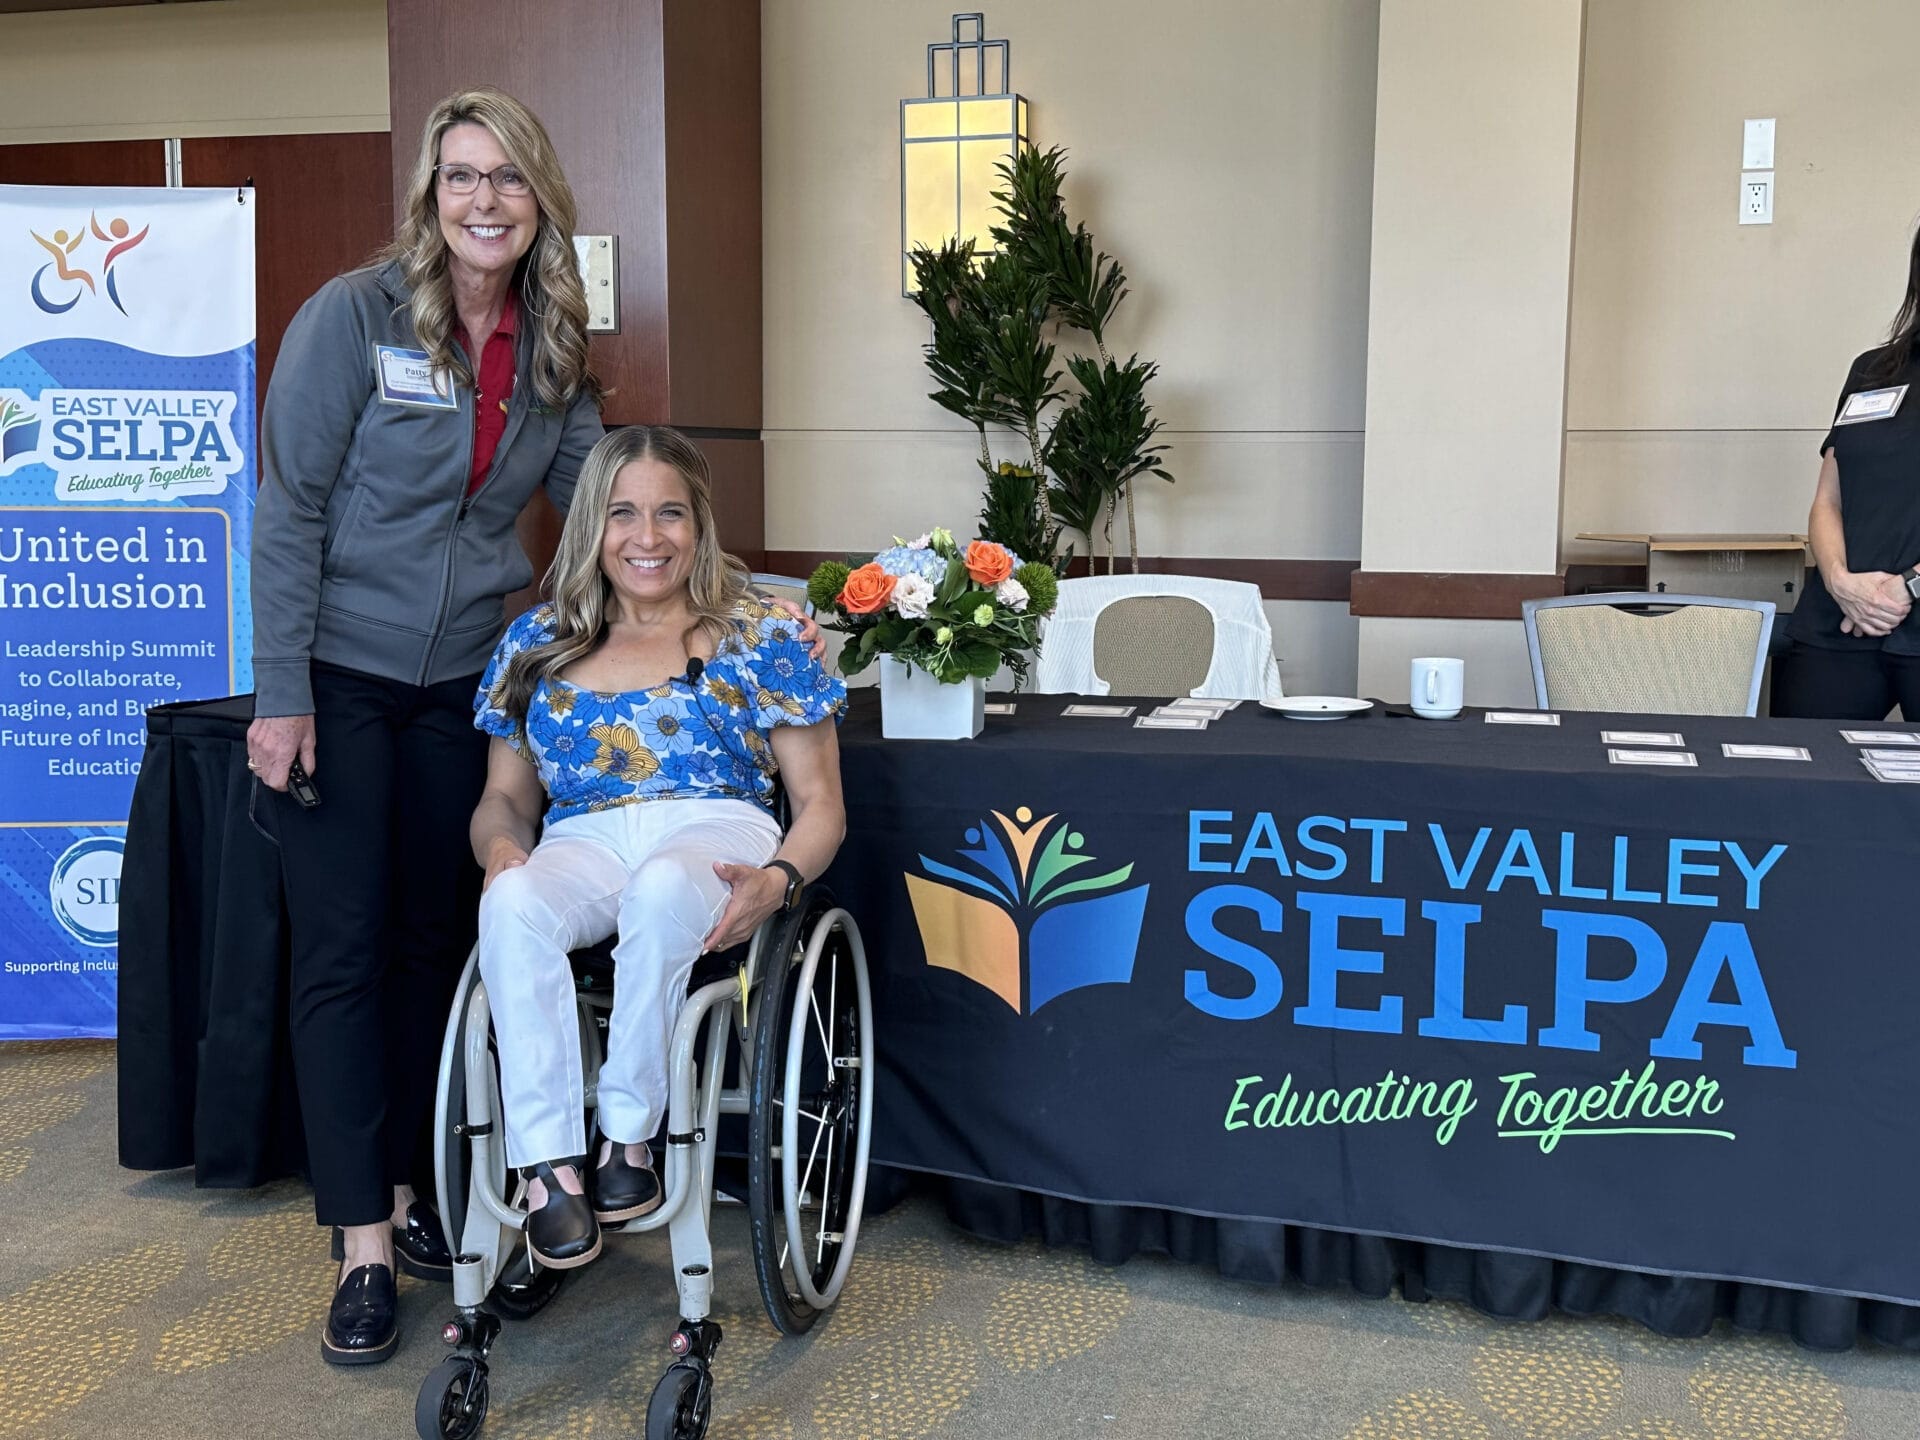 alycia sitting with patty metheny at welcome desk for east valley selpa inclusion summit conference